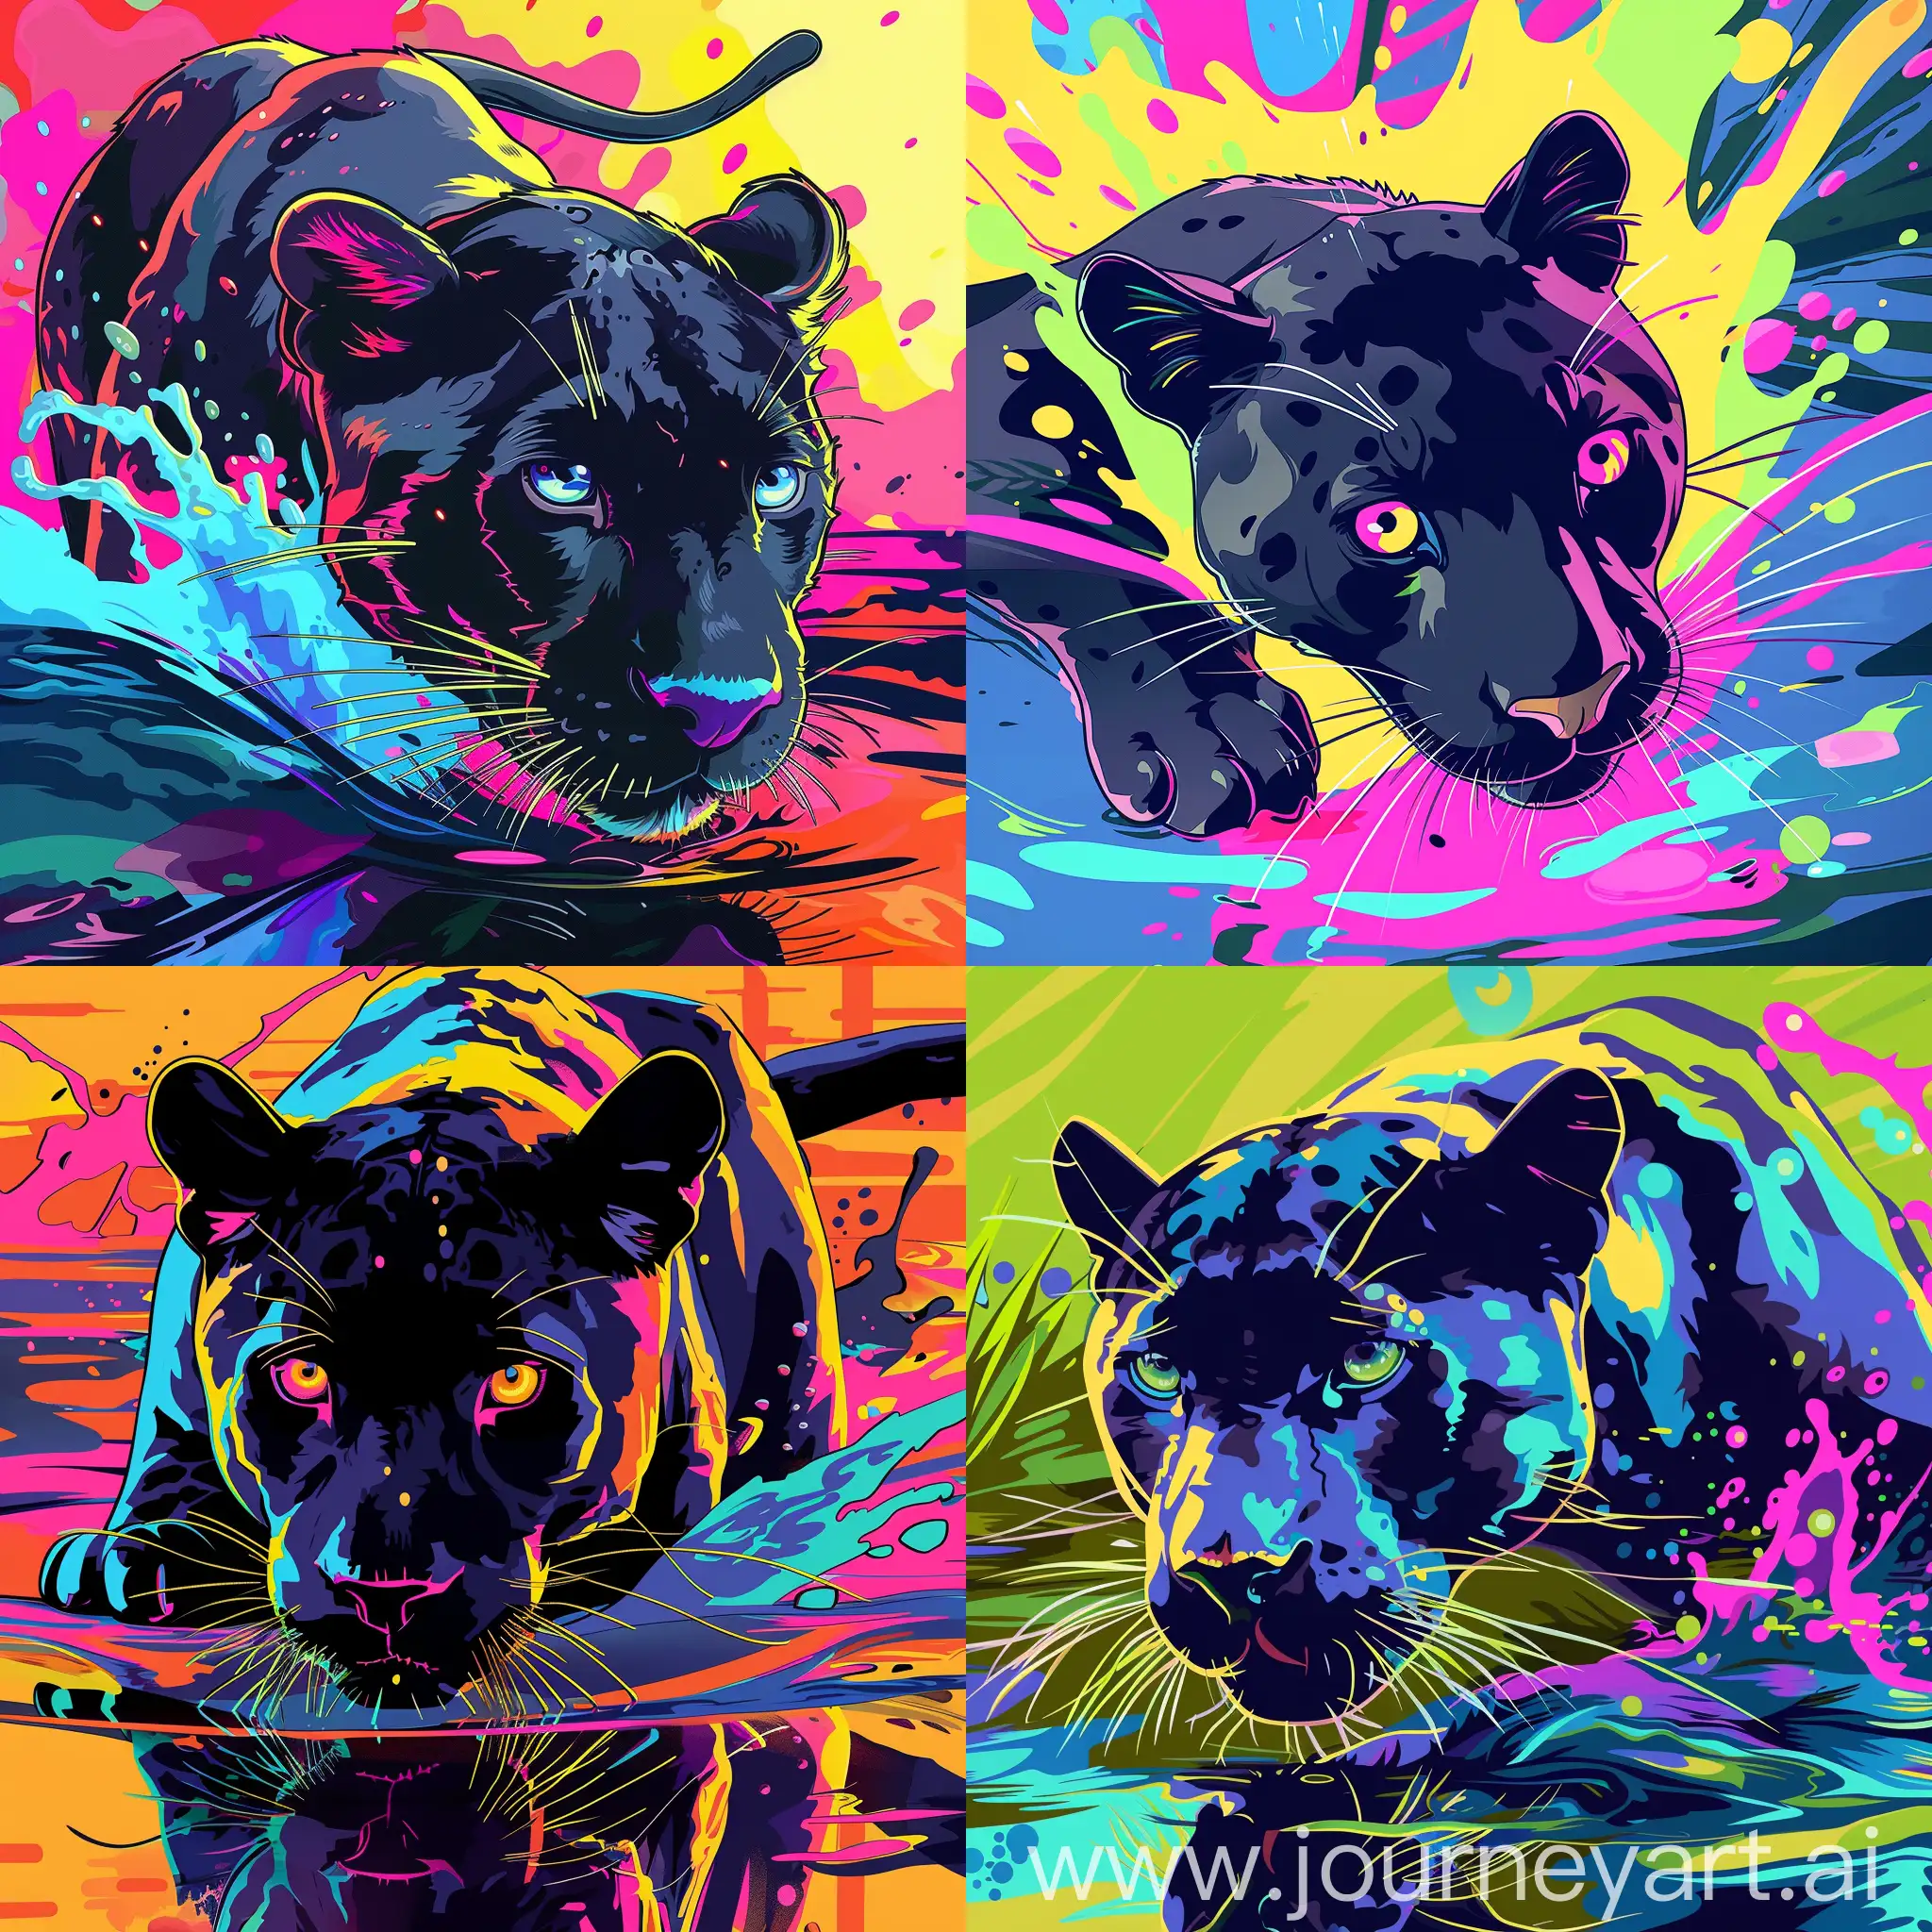 Neon-Panther-Prowling-in-Shallow-Water-Vibrant-HD-Cartoon-Illustration